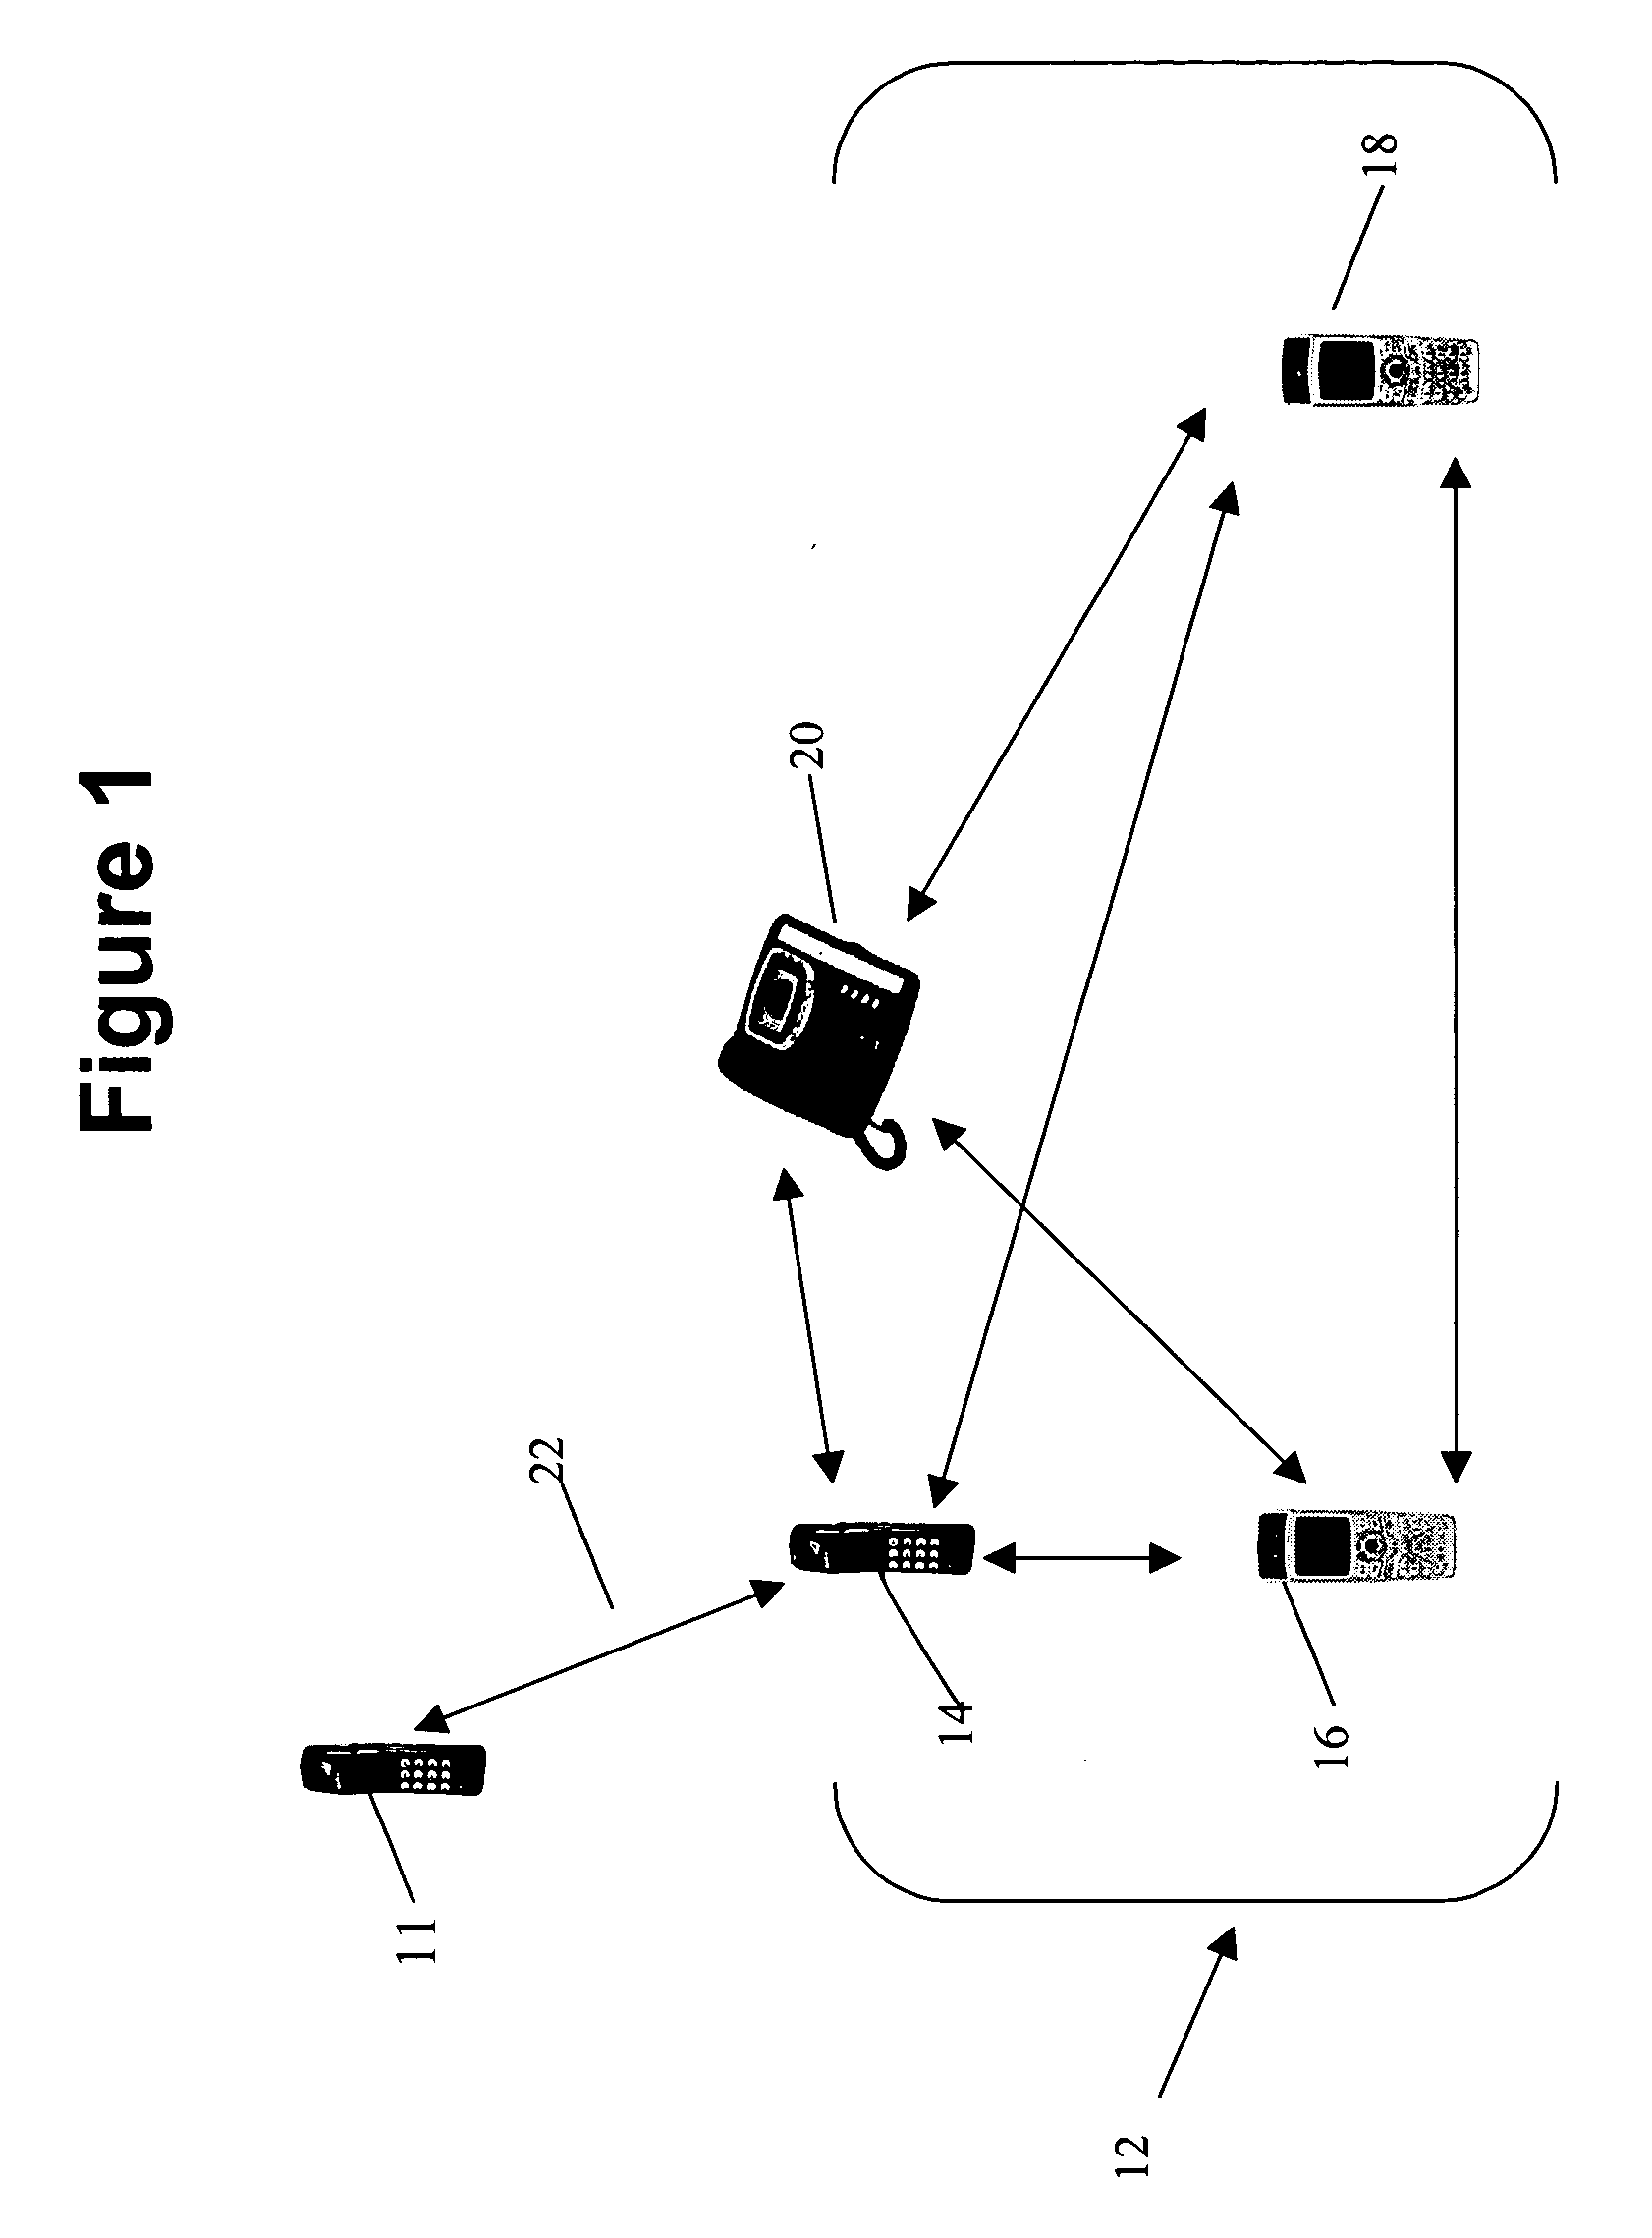 Peer-to-peer synchronization of data between devices